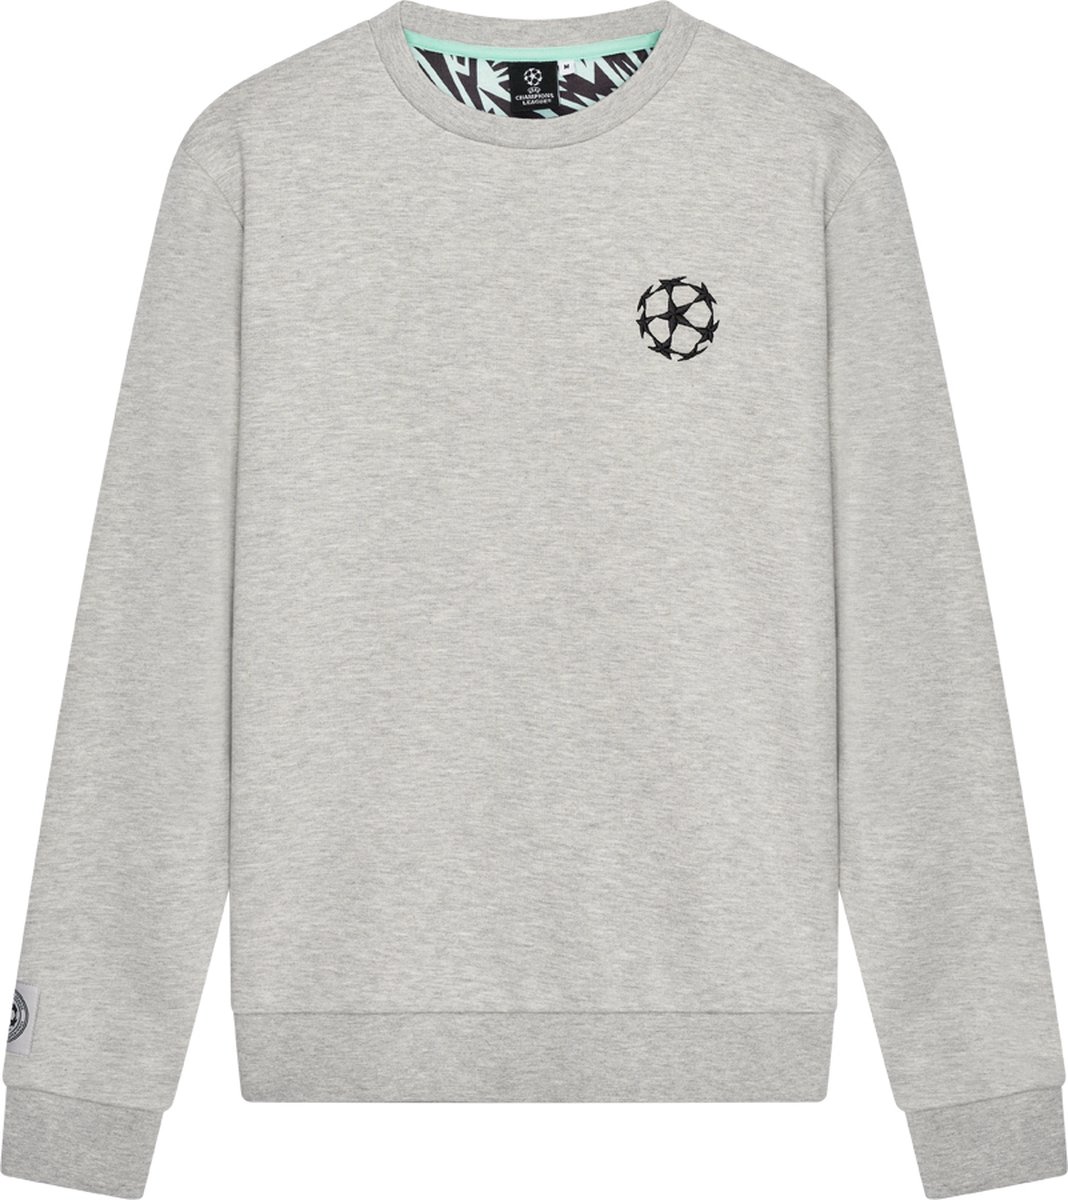 Champions League lifestyle sweater - maat M